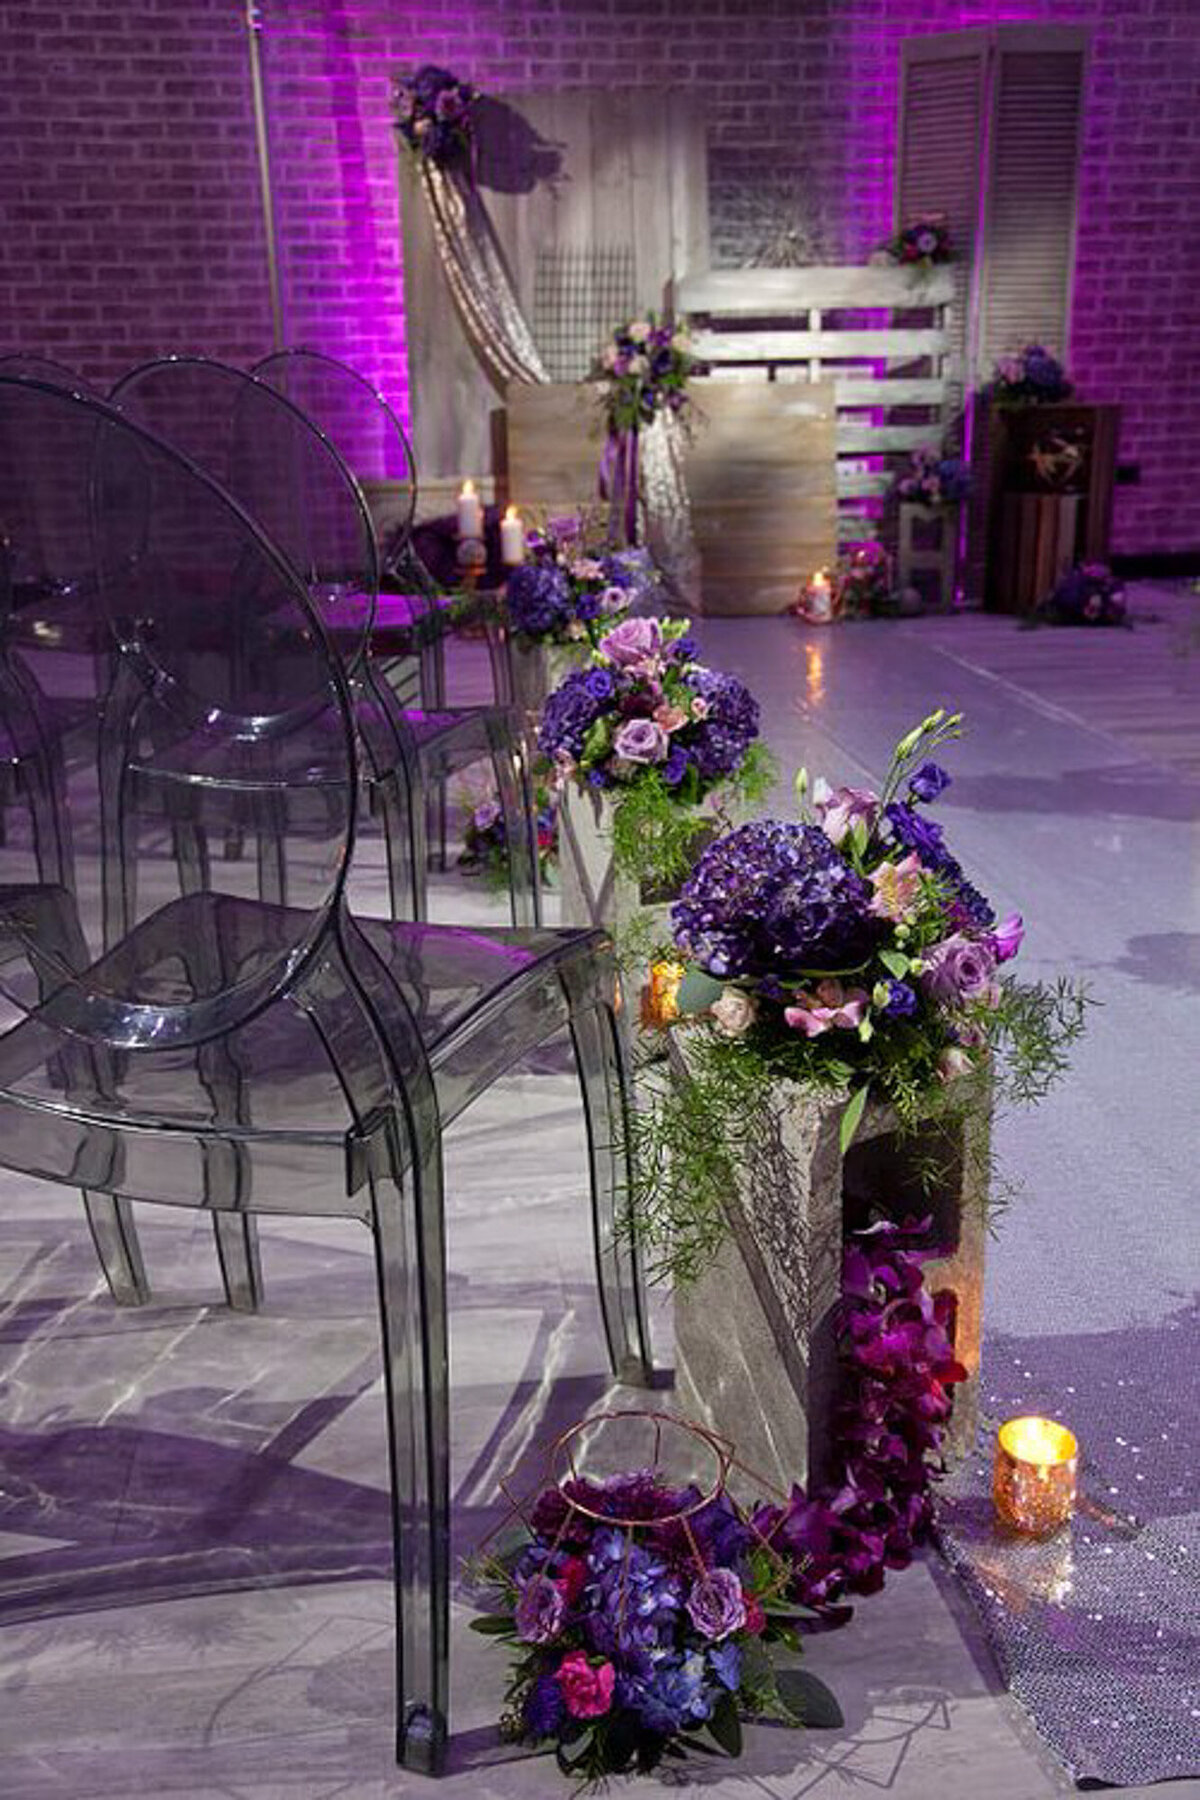 Wedding ceremony site with transparent chair and florals in purple